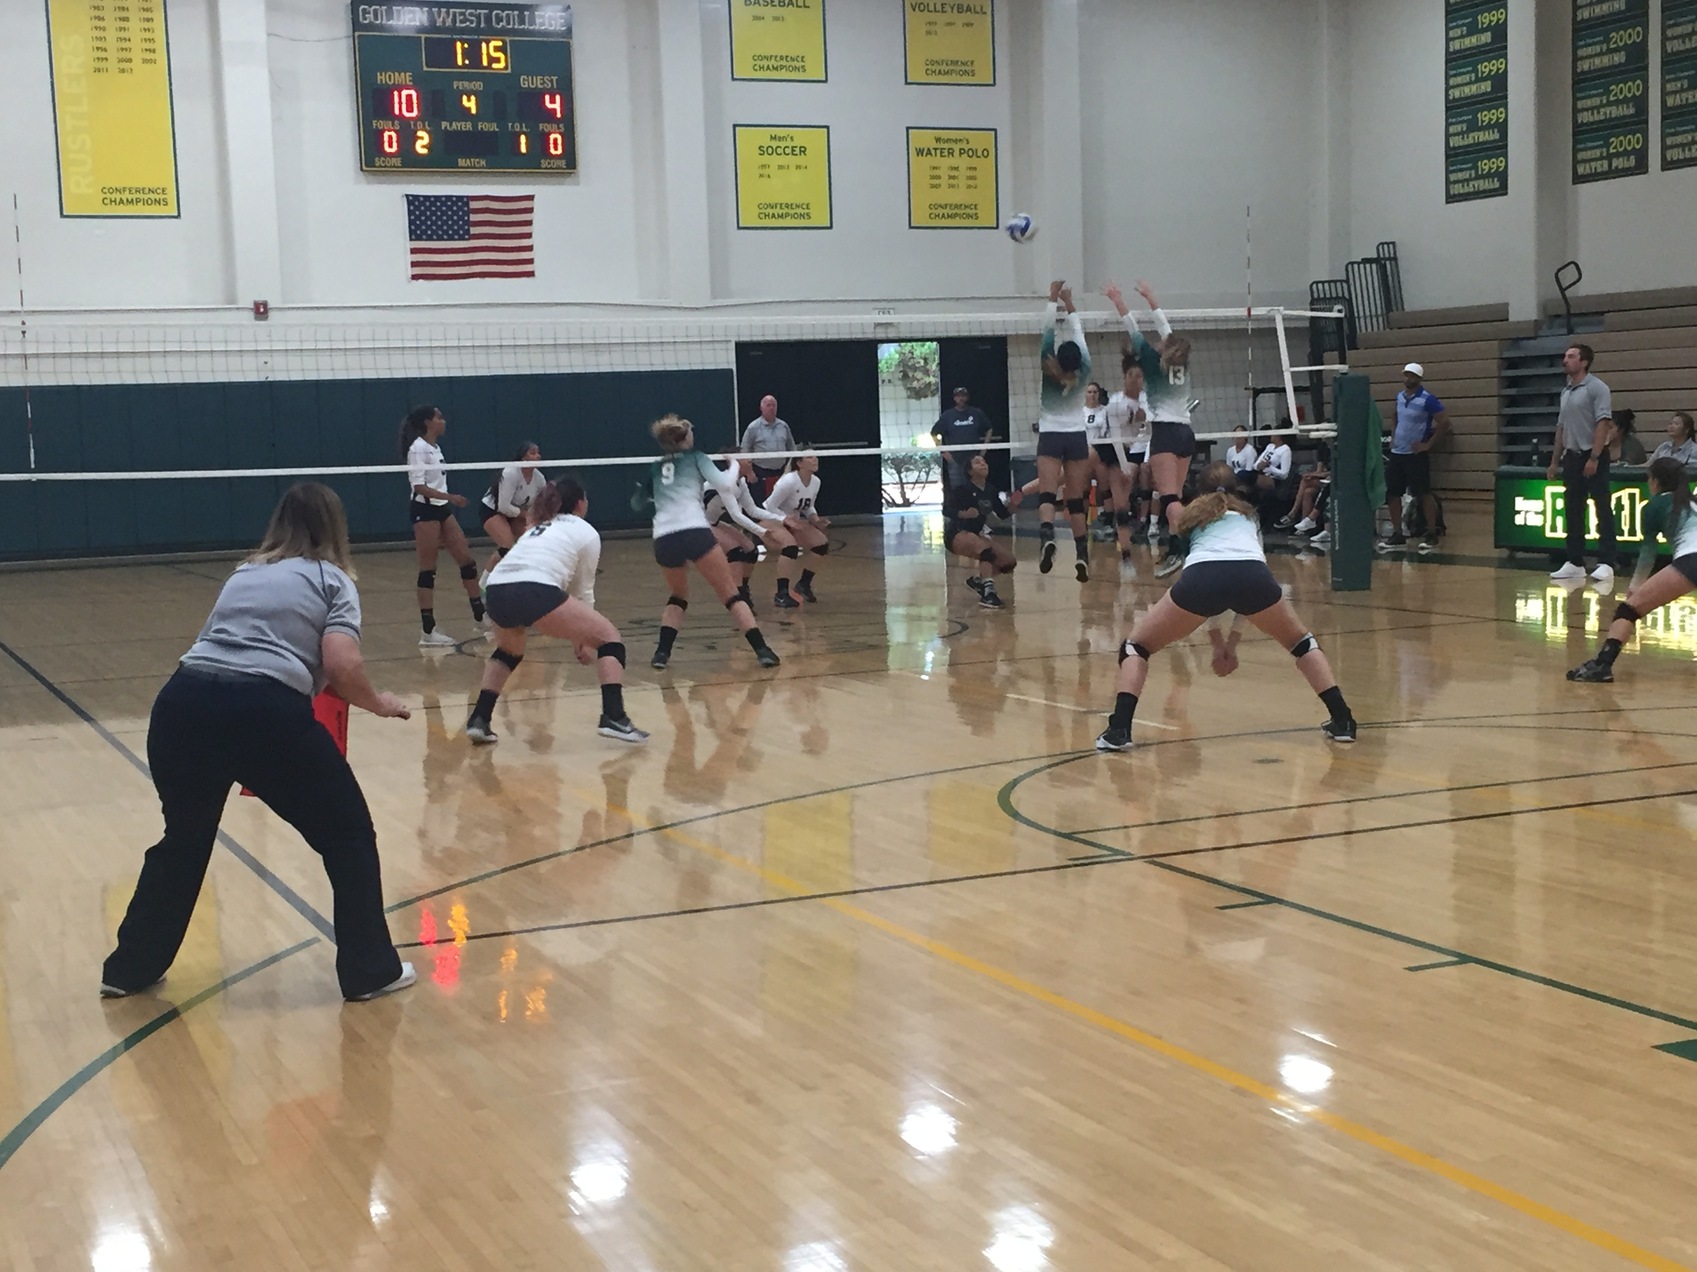 W Volleyball: Win in 5 Sets to Stay Undefeated